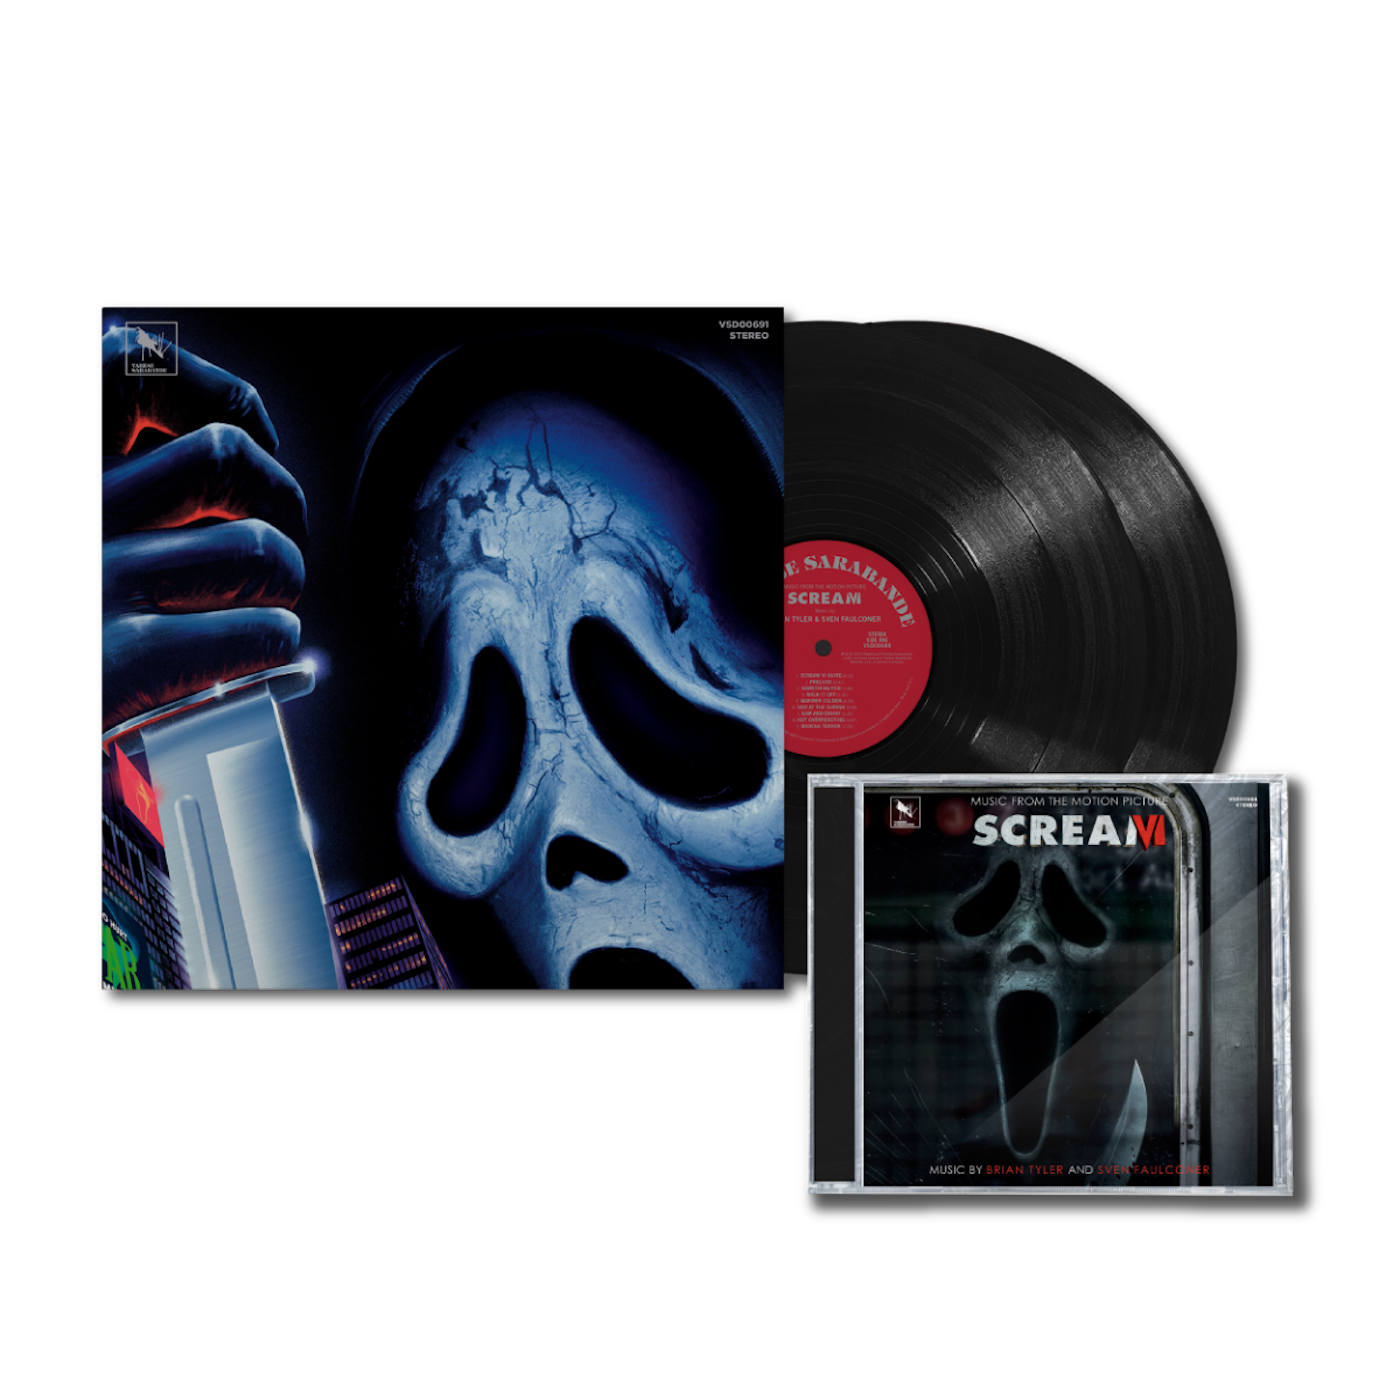 Scream VI - Music from the Motion Picture LP - Black) + 2 Disc CD Bundle